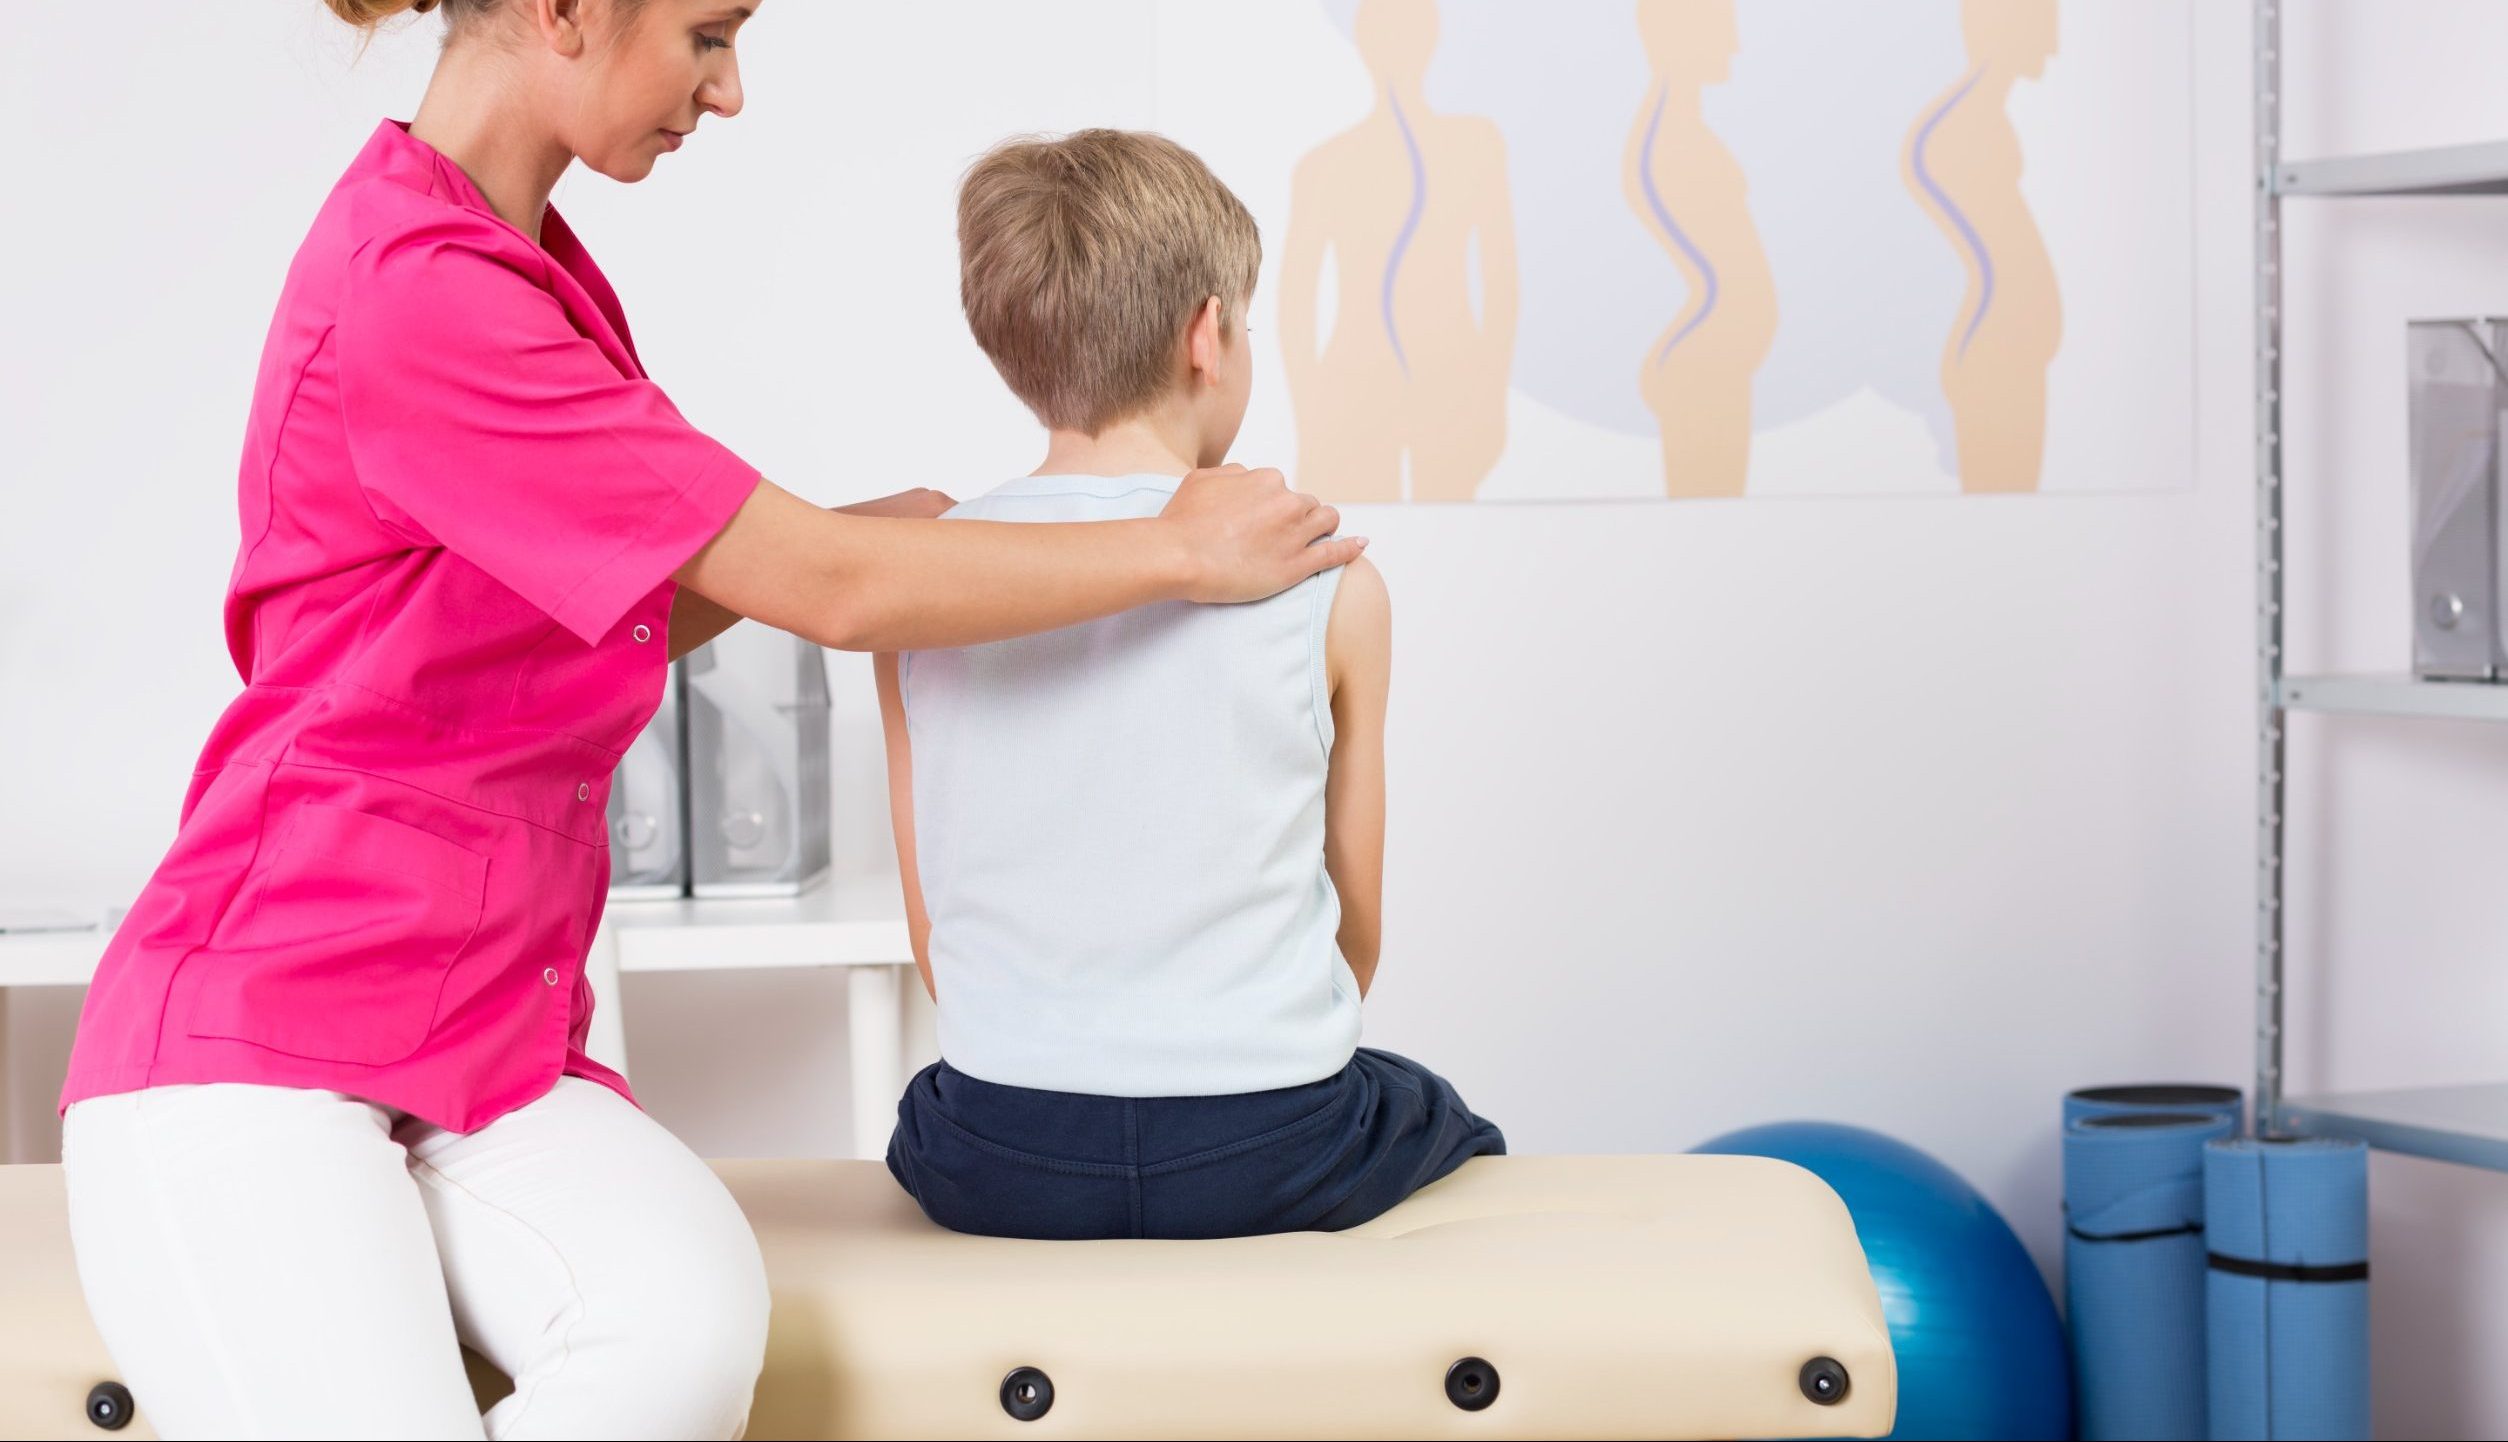 Provider correcting body posture of a small boy